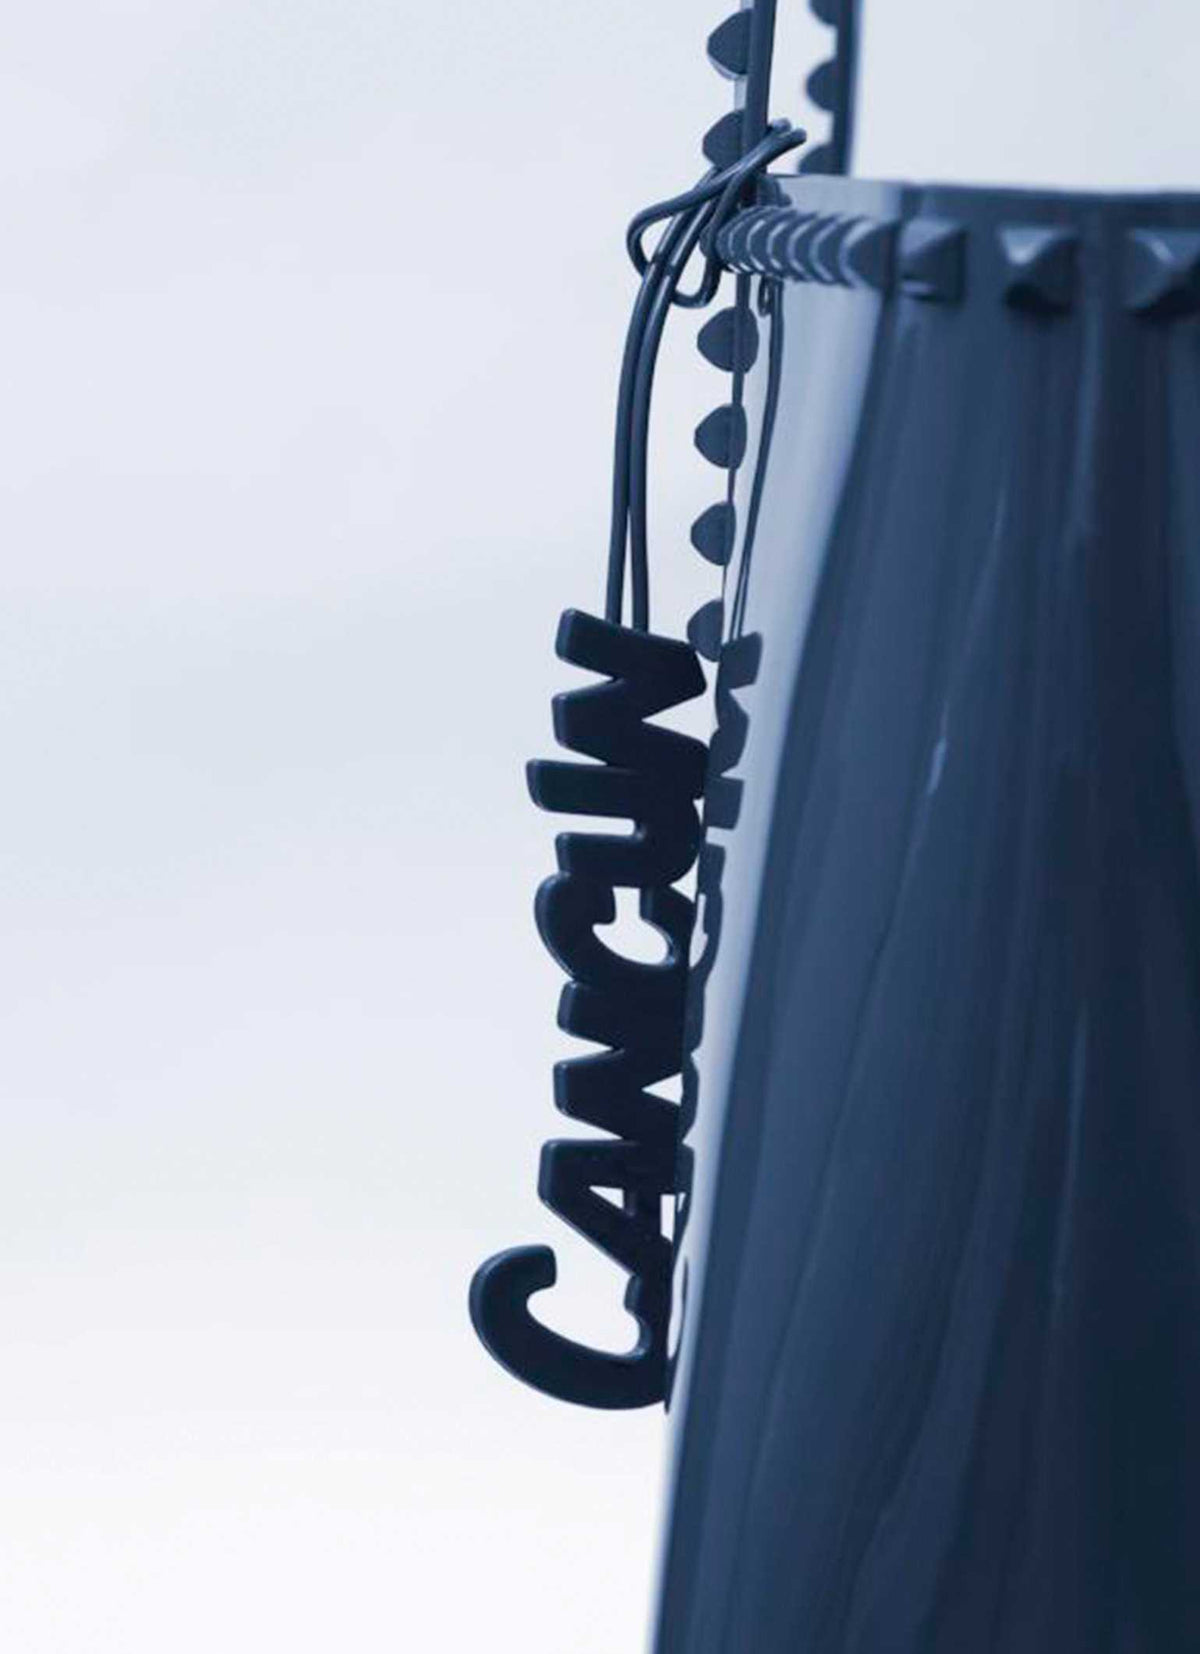 Waterproof Carmen Sol Cancun jelly charms for purses on sale in color dark blue